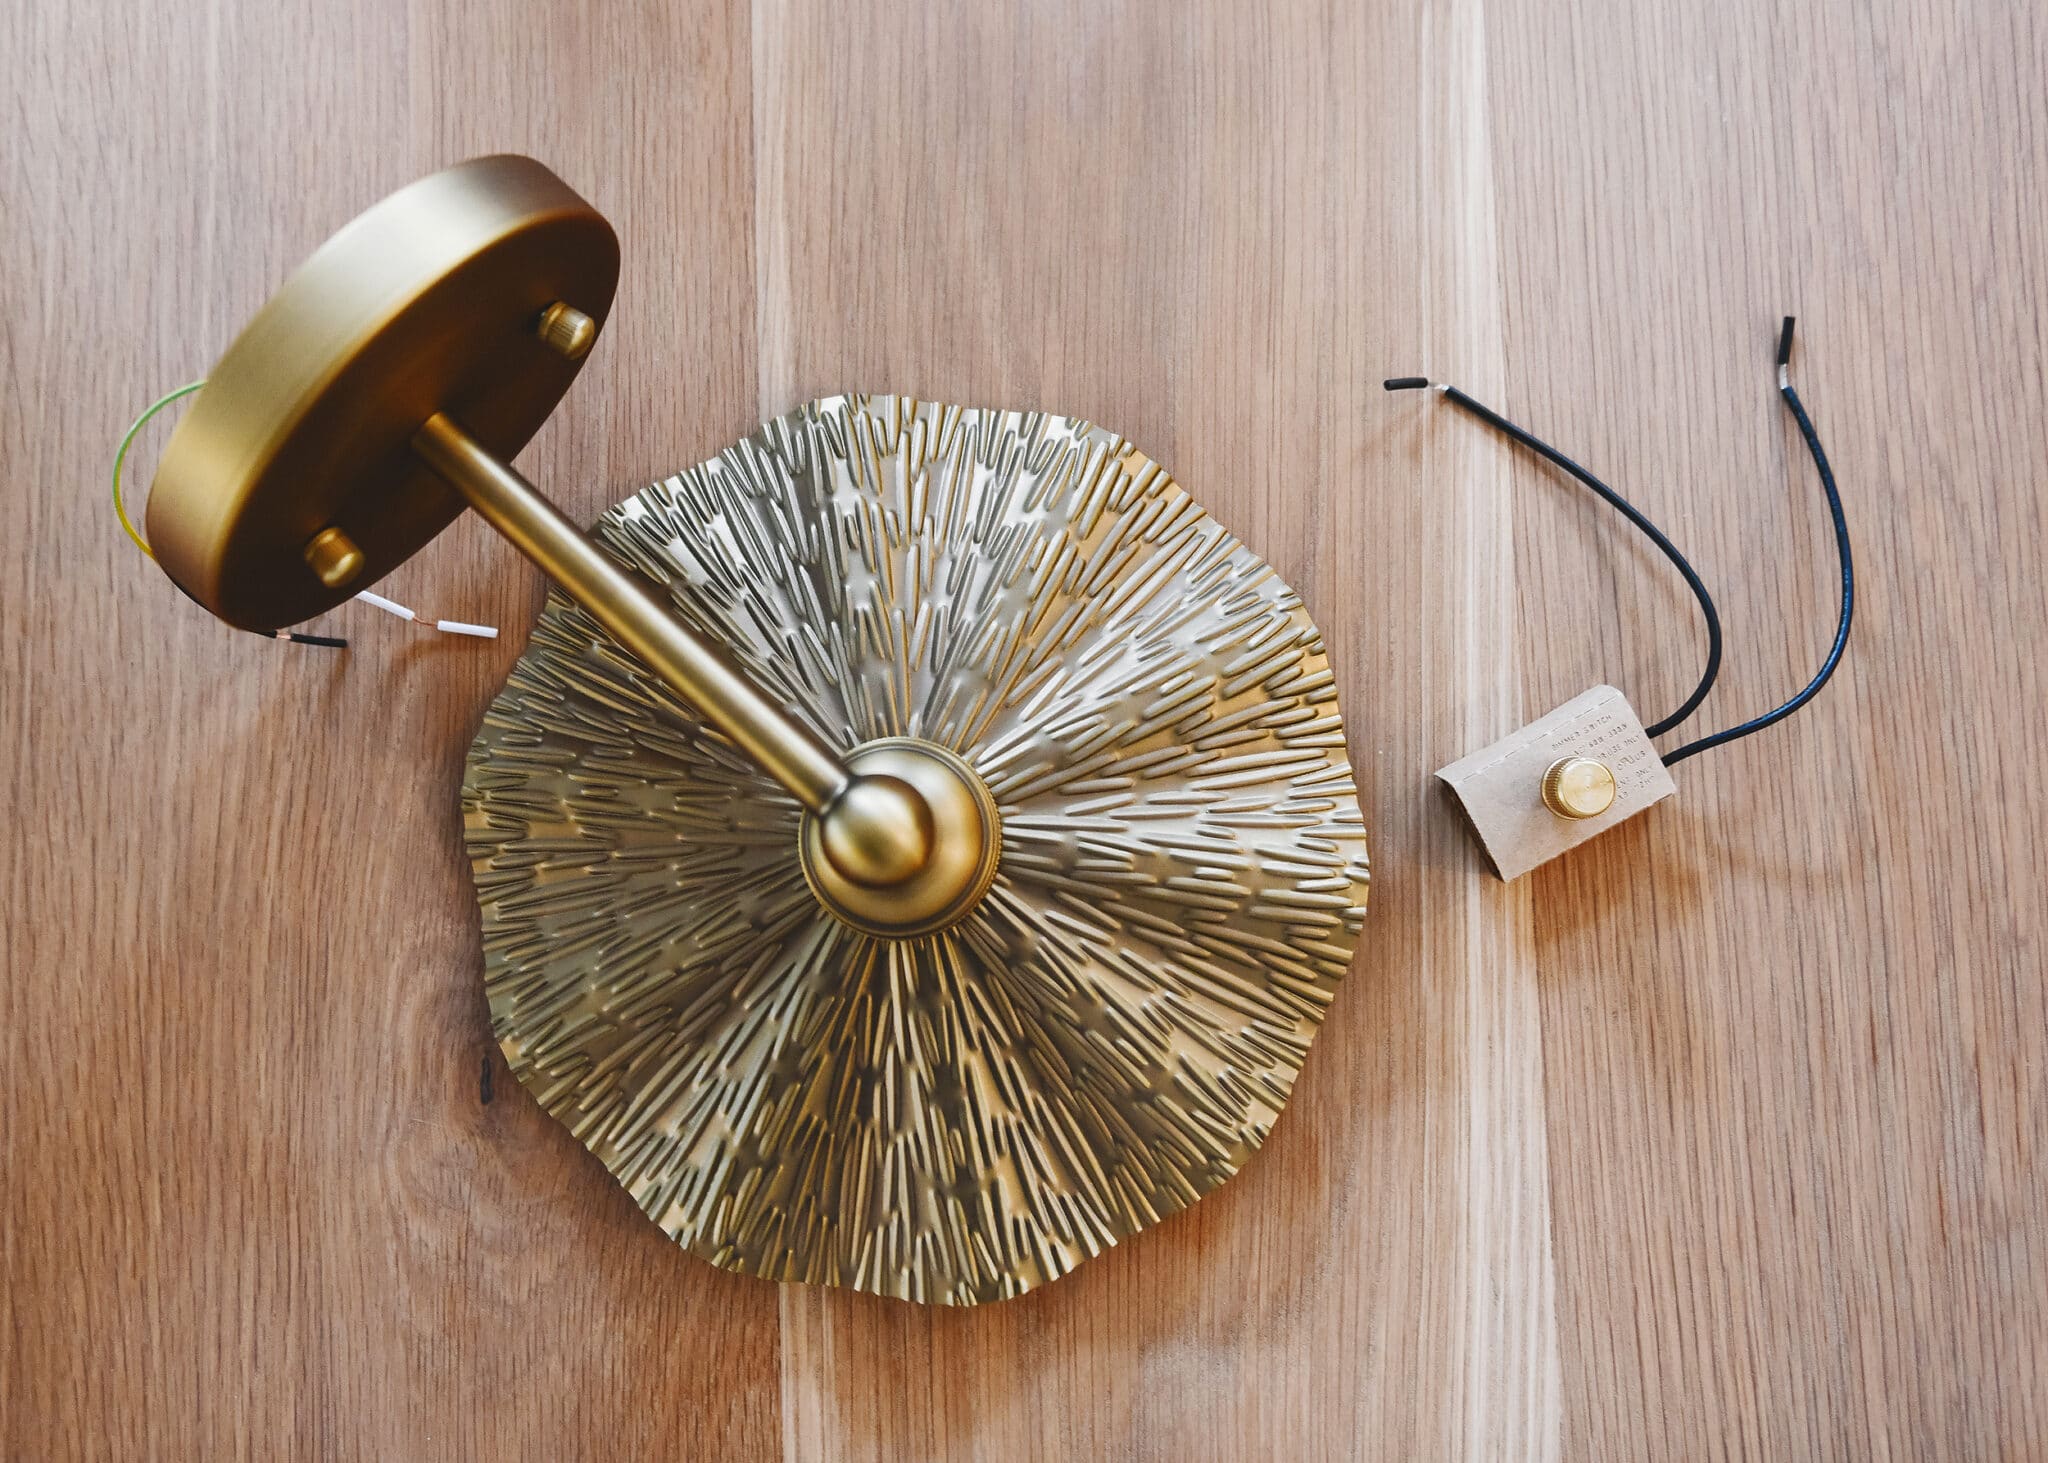 Brass sconce and rotary dimmer ready for installation | via Yellow Brick Home